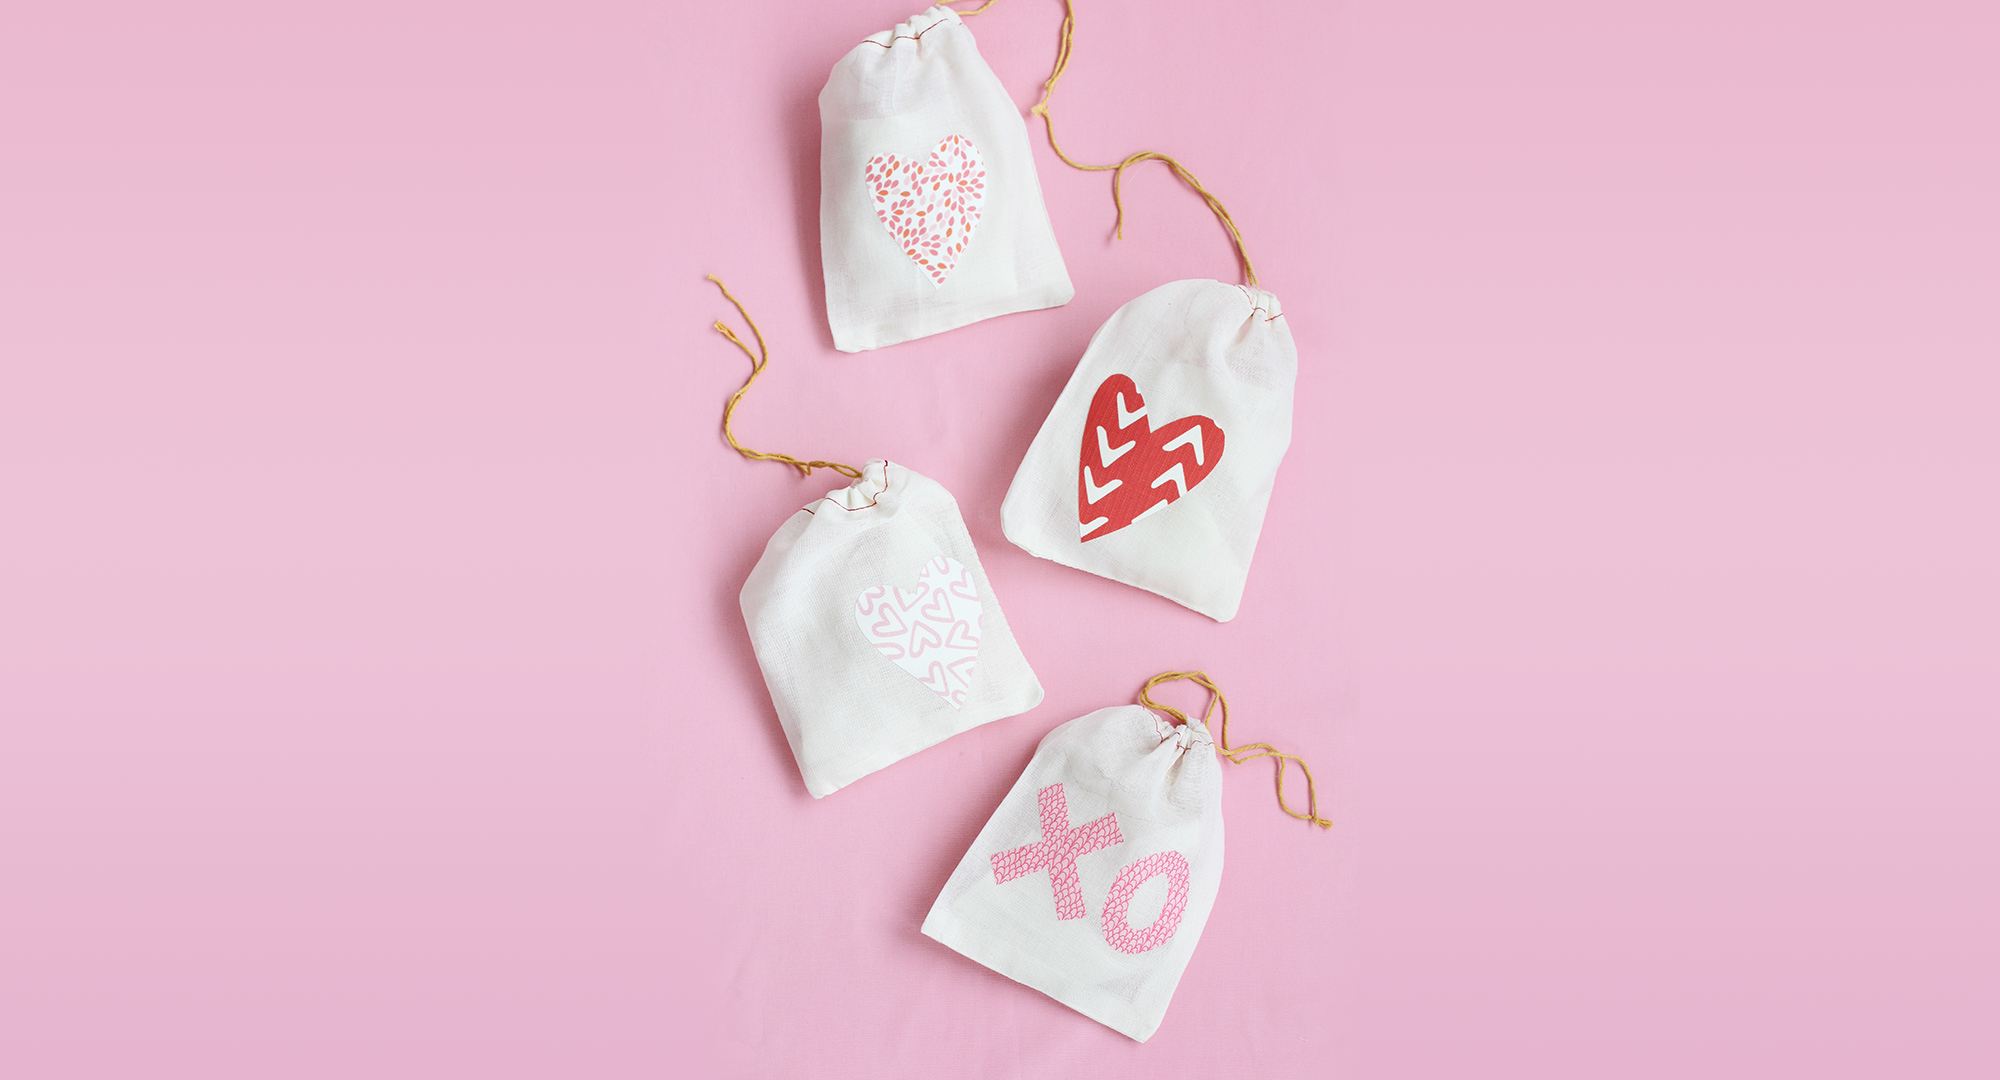 easy valentine crafts for adults